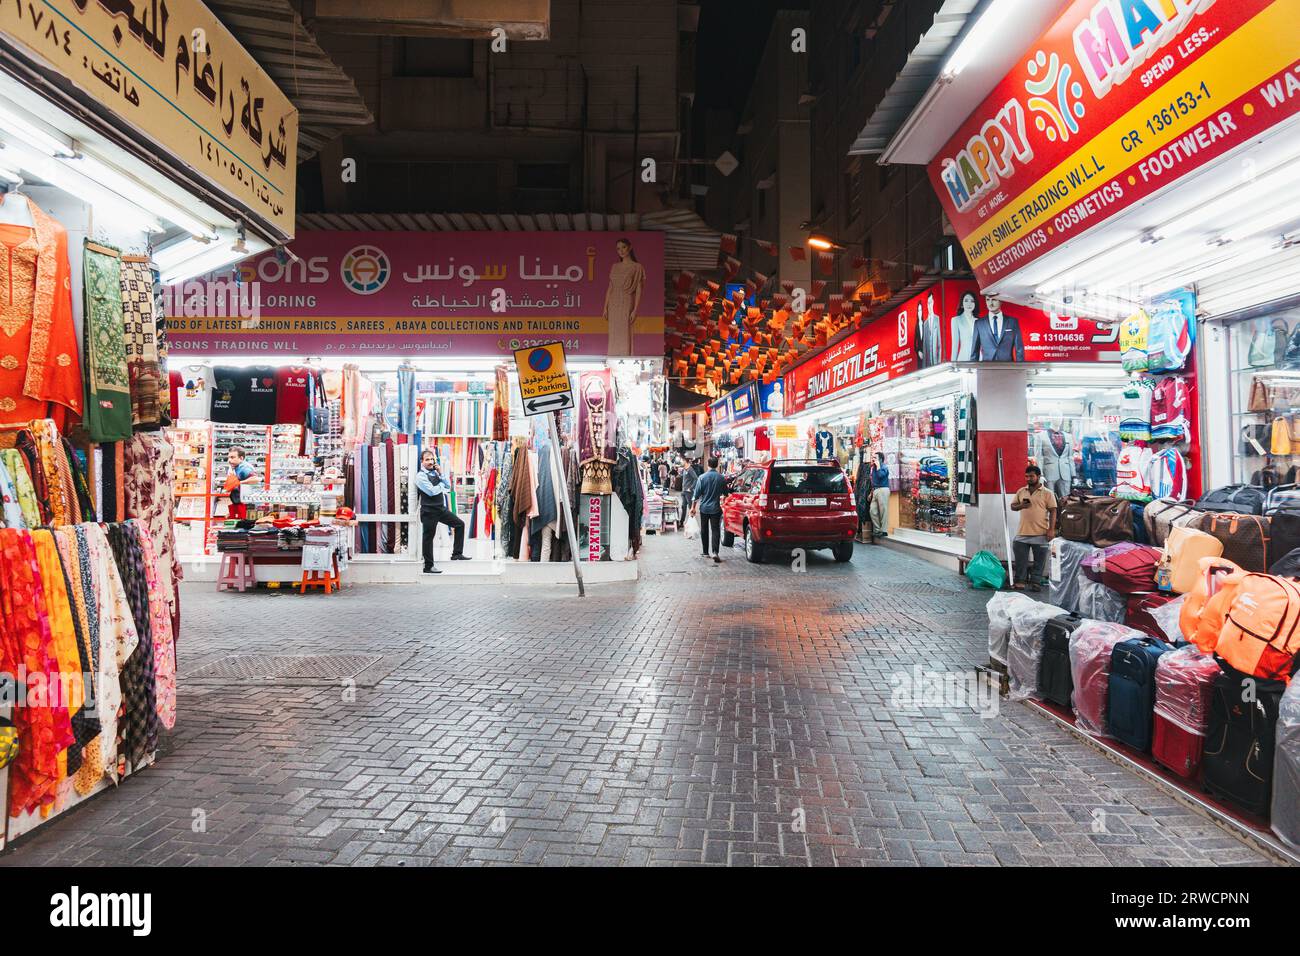 a street full of shops selling clothing, toys and other household items in the Manama Souq, Bahrain, at night Stock Photo